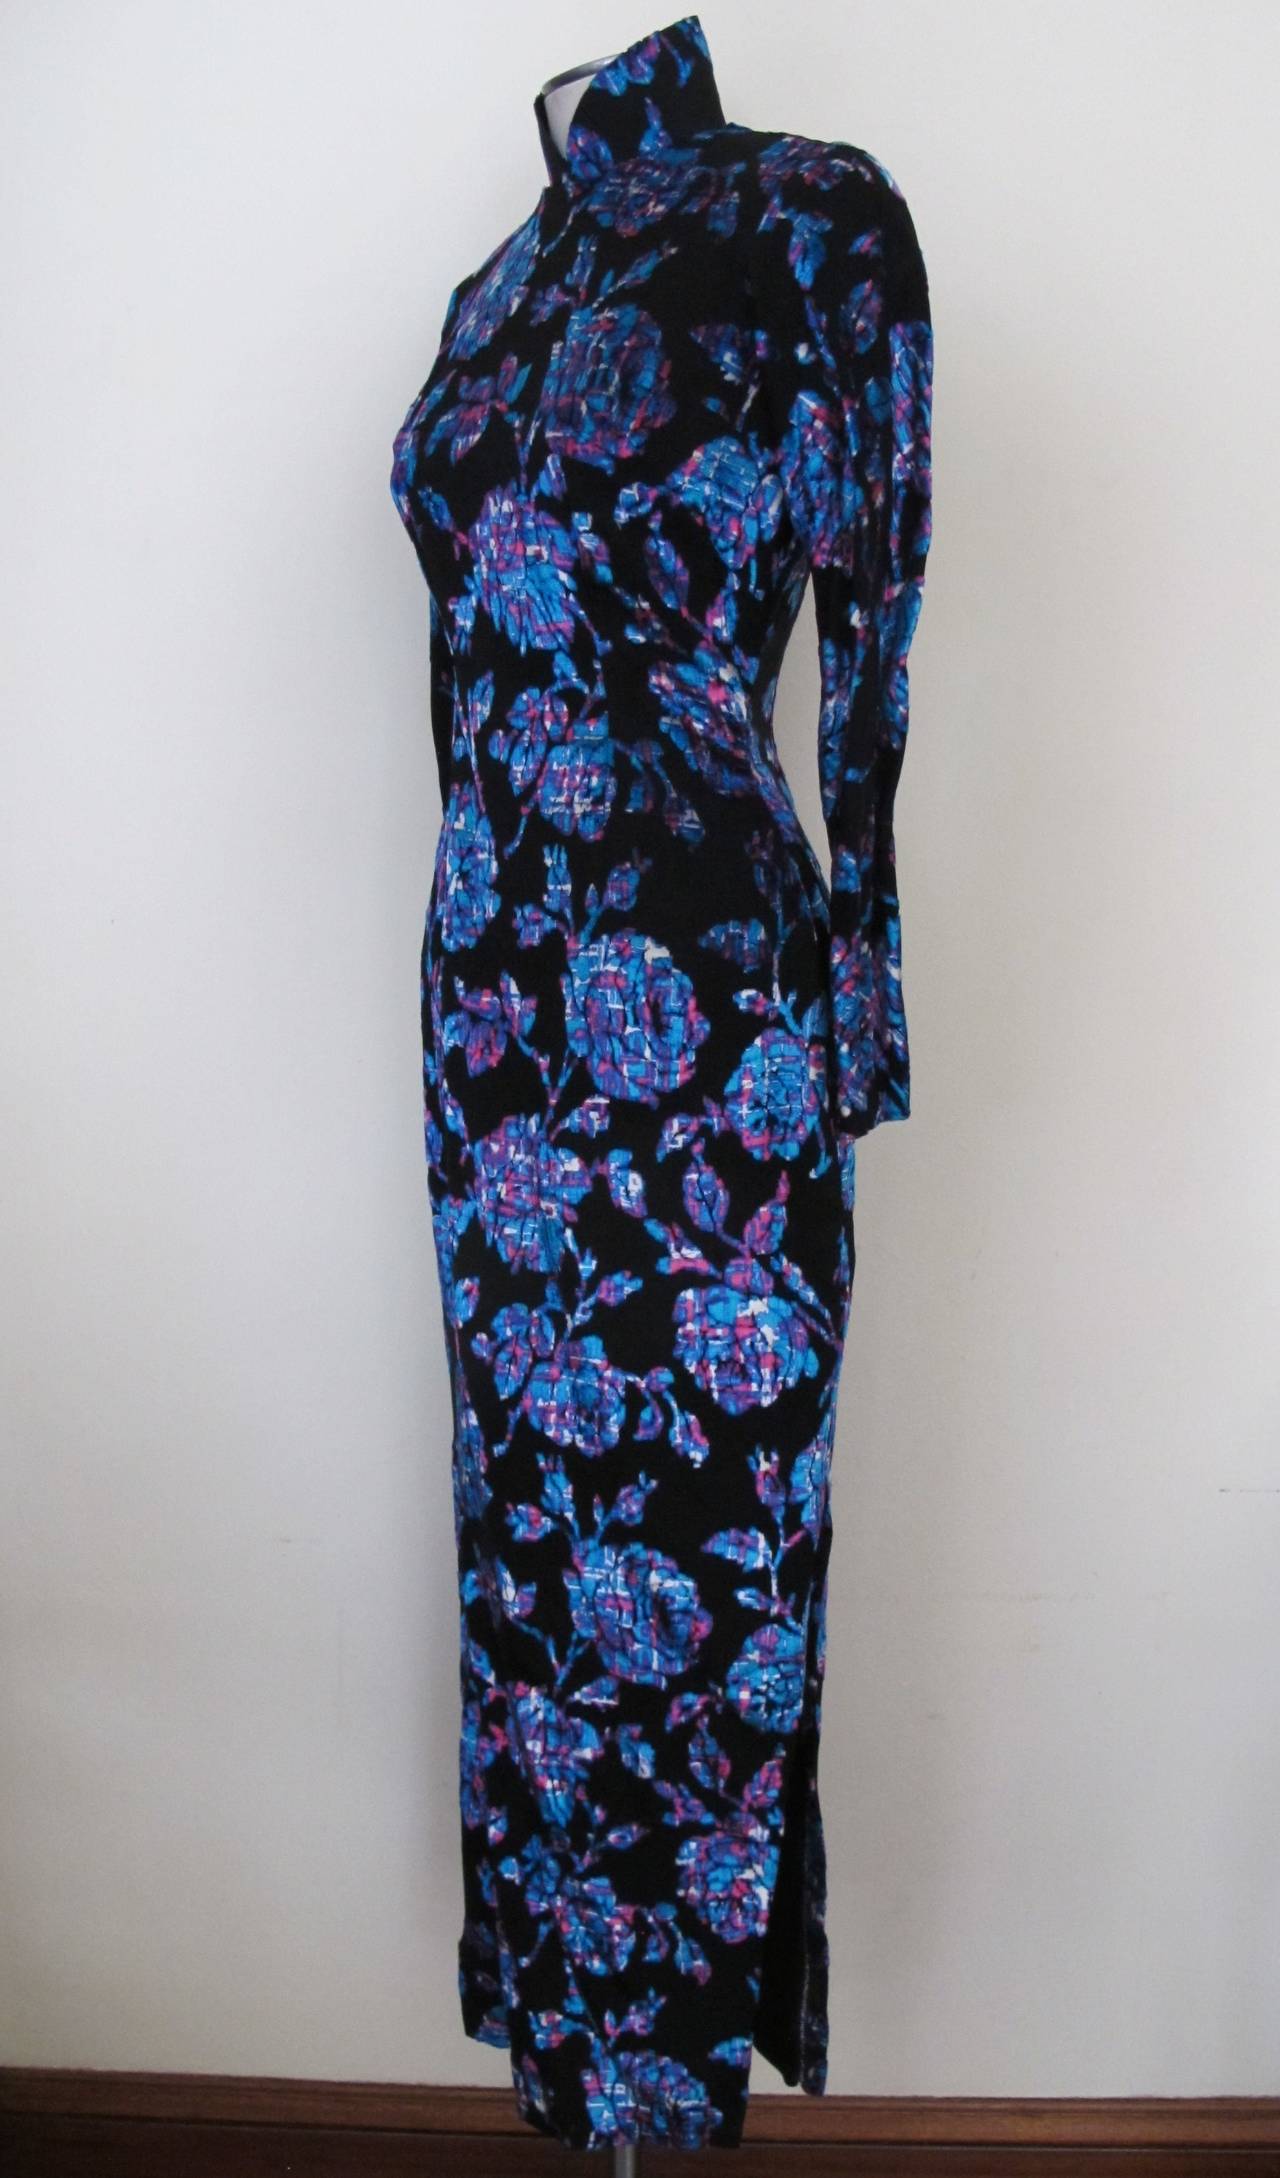 Asian Mandarin Collar Black Dress with vibrant flowers: neon blue and neon pink. It is exquisite when on the human form. It is lined in silk and hand-tailored. Sleeve length measures 22.5 inches. Shoulder to shoulder measures 14 inches.